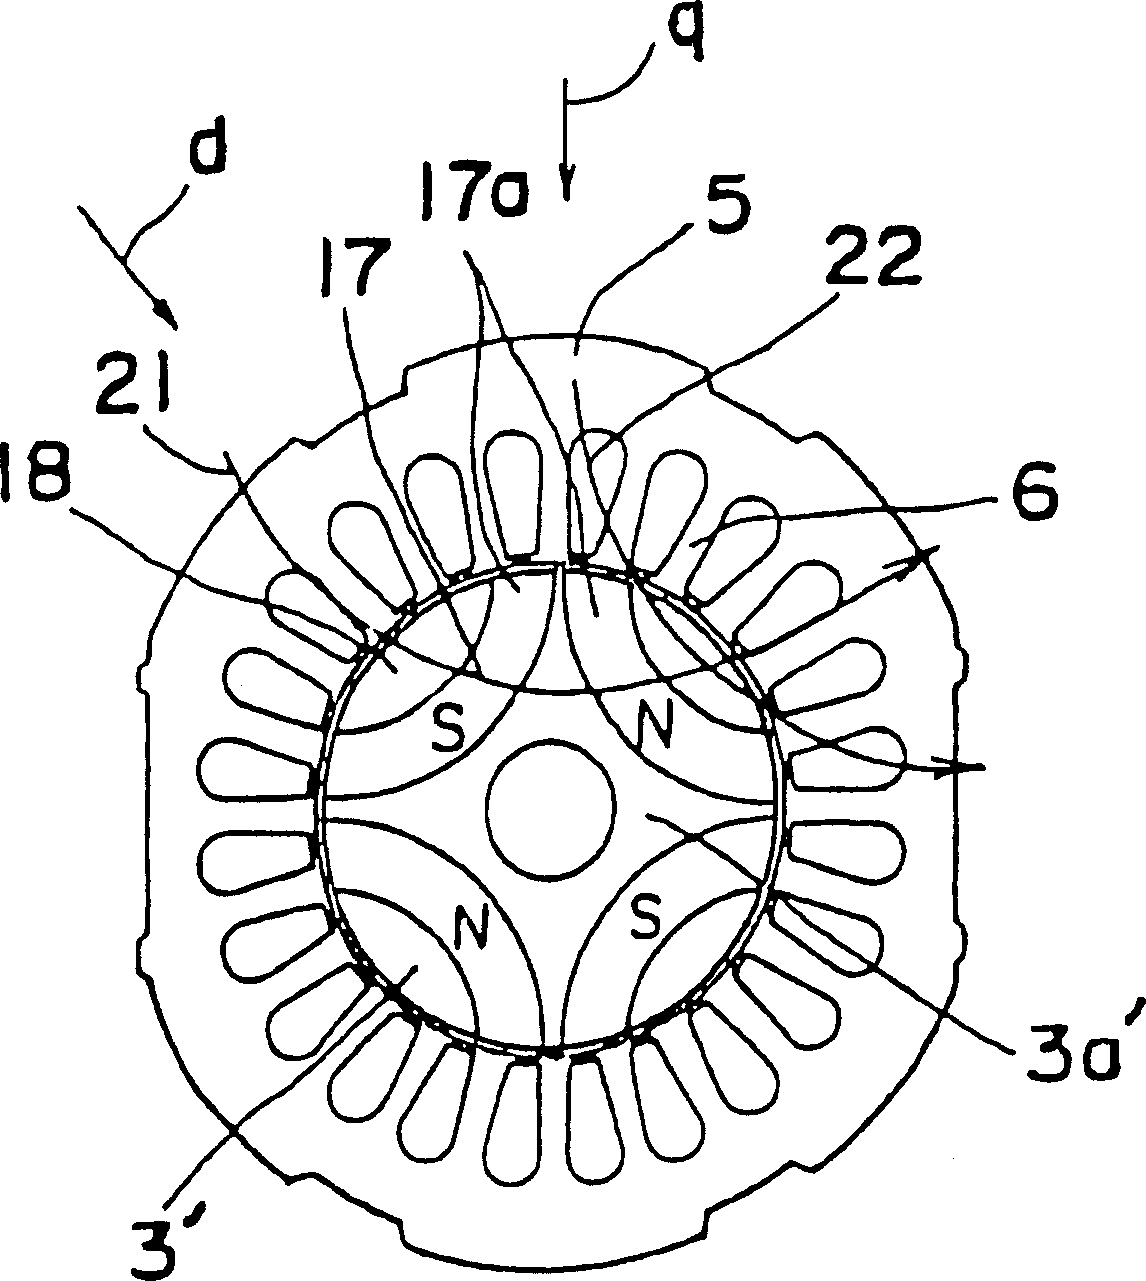 Motor with built-in permanent magnets